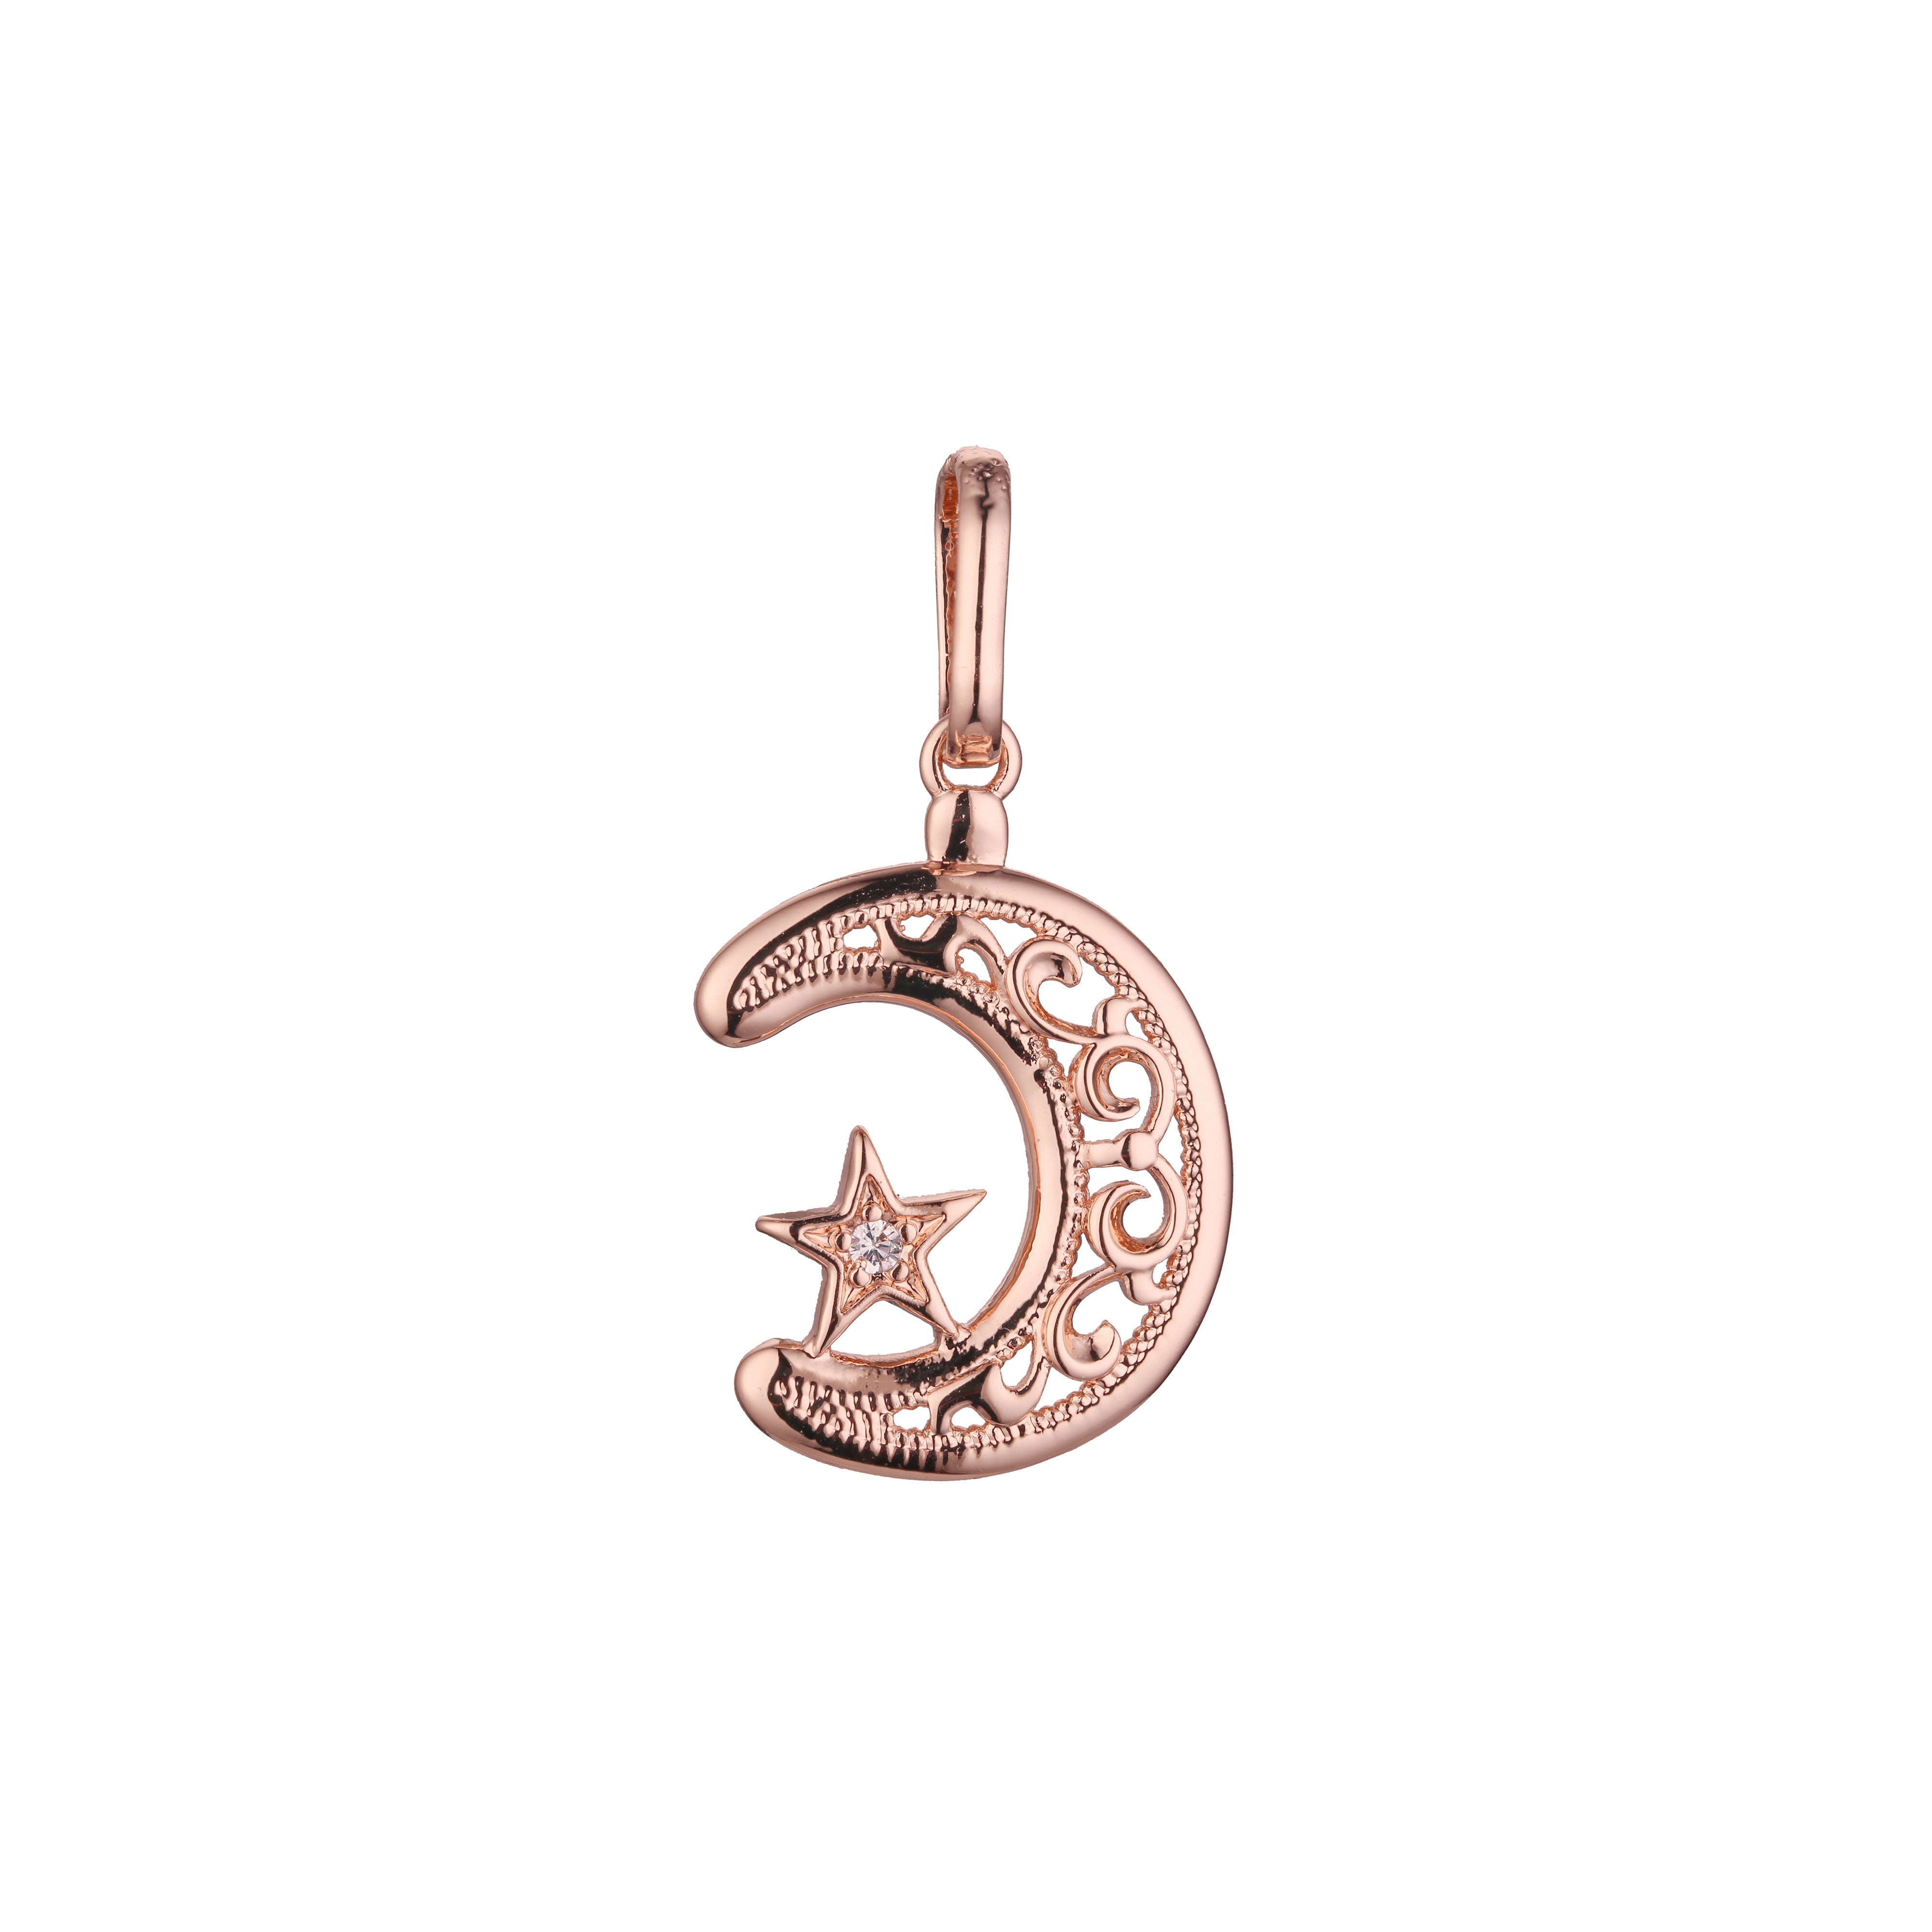 Star and Crescent moon Islamic Rose Gold, 14K Gold two tone, White Gold pendant